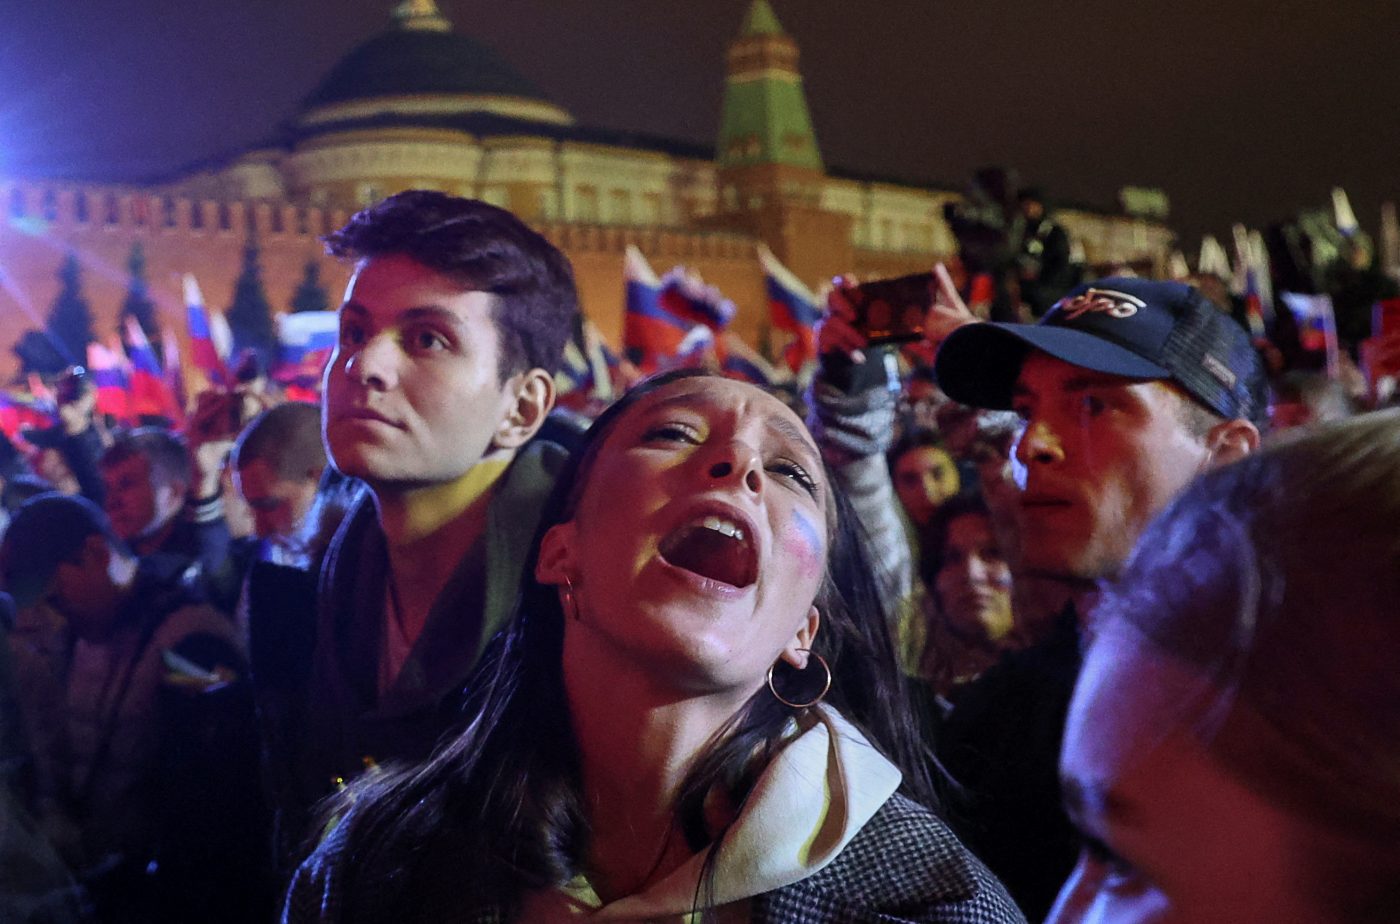 Photo: A spectator reacts during a concert marking the declared annexation of the Russian-controlled territories of four Ukraine's Donetsk, Luhansk, Kherson and Zaporizhzhia regions, after holding what Russian authorities called referendums in the occupied areas of Ukraine that were condemned by Kyiv and governments worldwide, in Red Square in central Moscow, Russia, September 30, 2022. Credit: REUTERS/REUTERS PHOTOGRAPHER